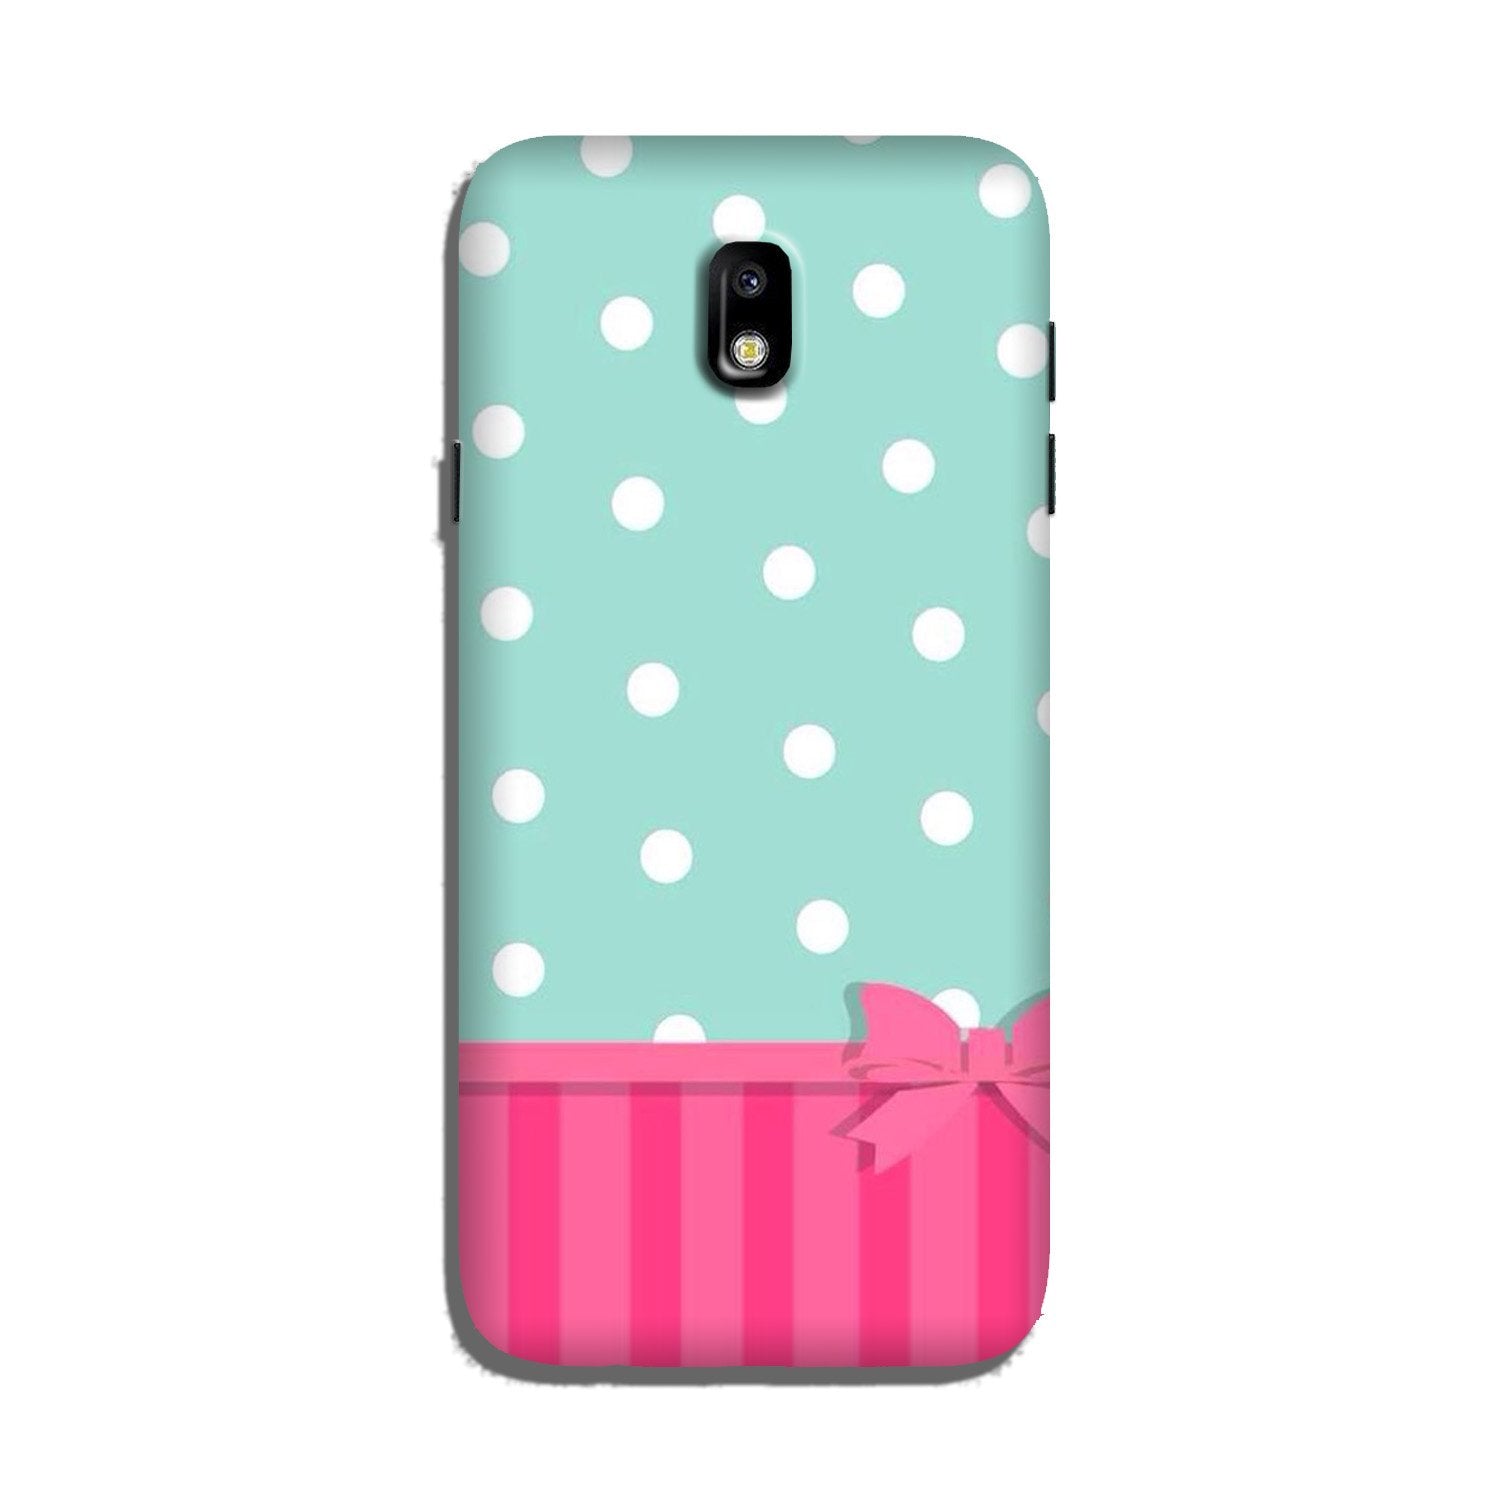 Gift Wrap Case for Galaxy J5 Pro